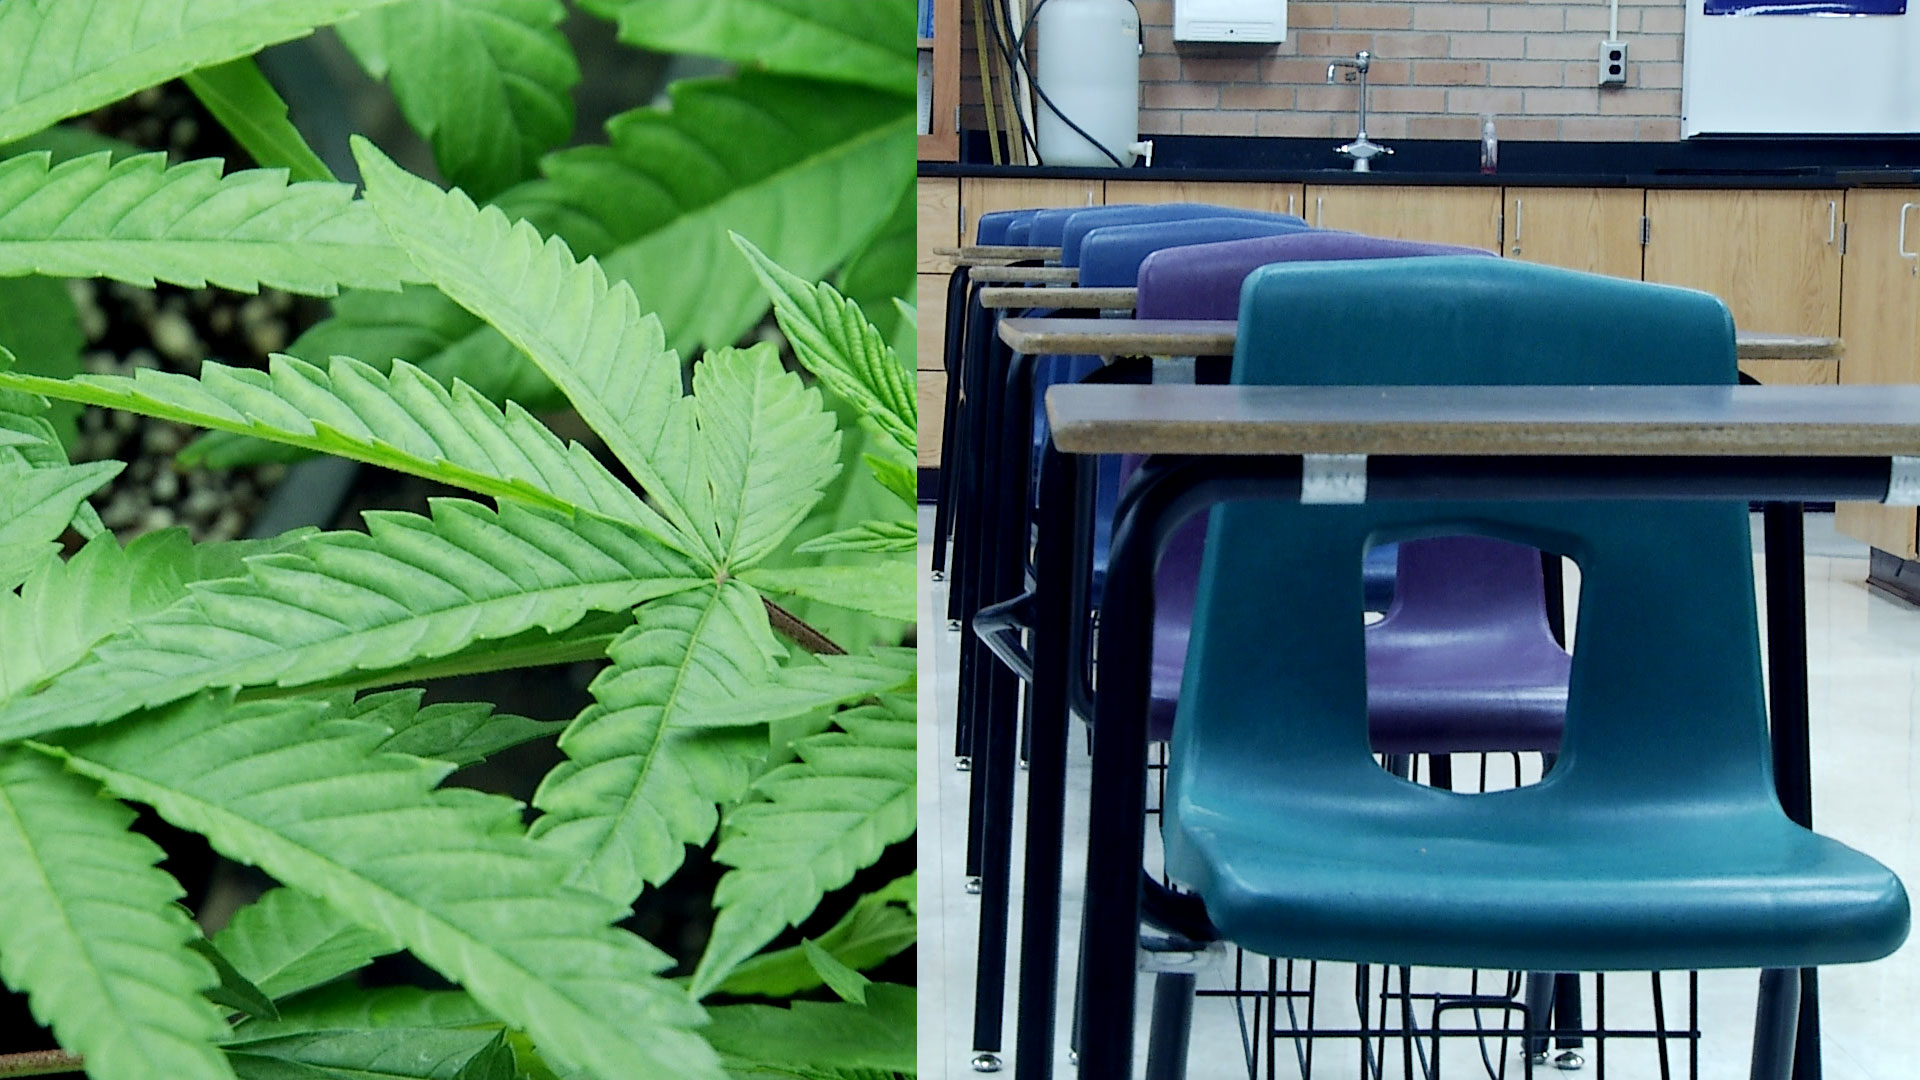 Proposition 207 would legalize recreational marijuana in Arizona. Proposition 208 would create a wealth tax in order to boost funding for educators. 